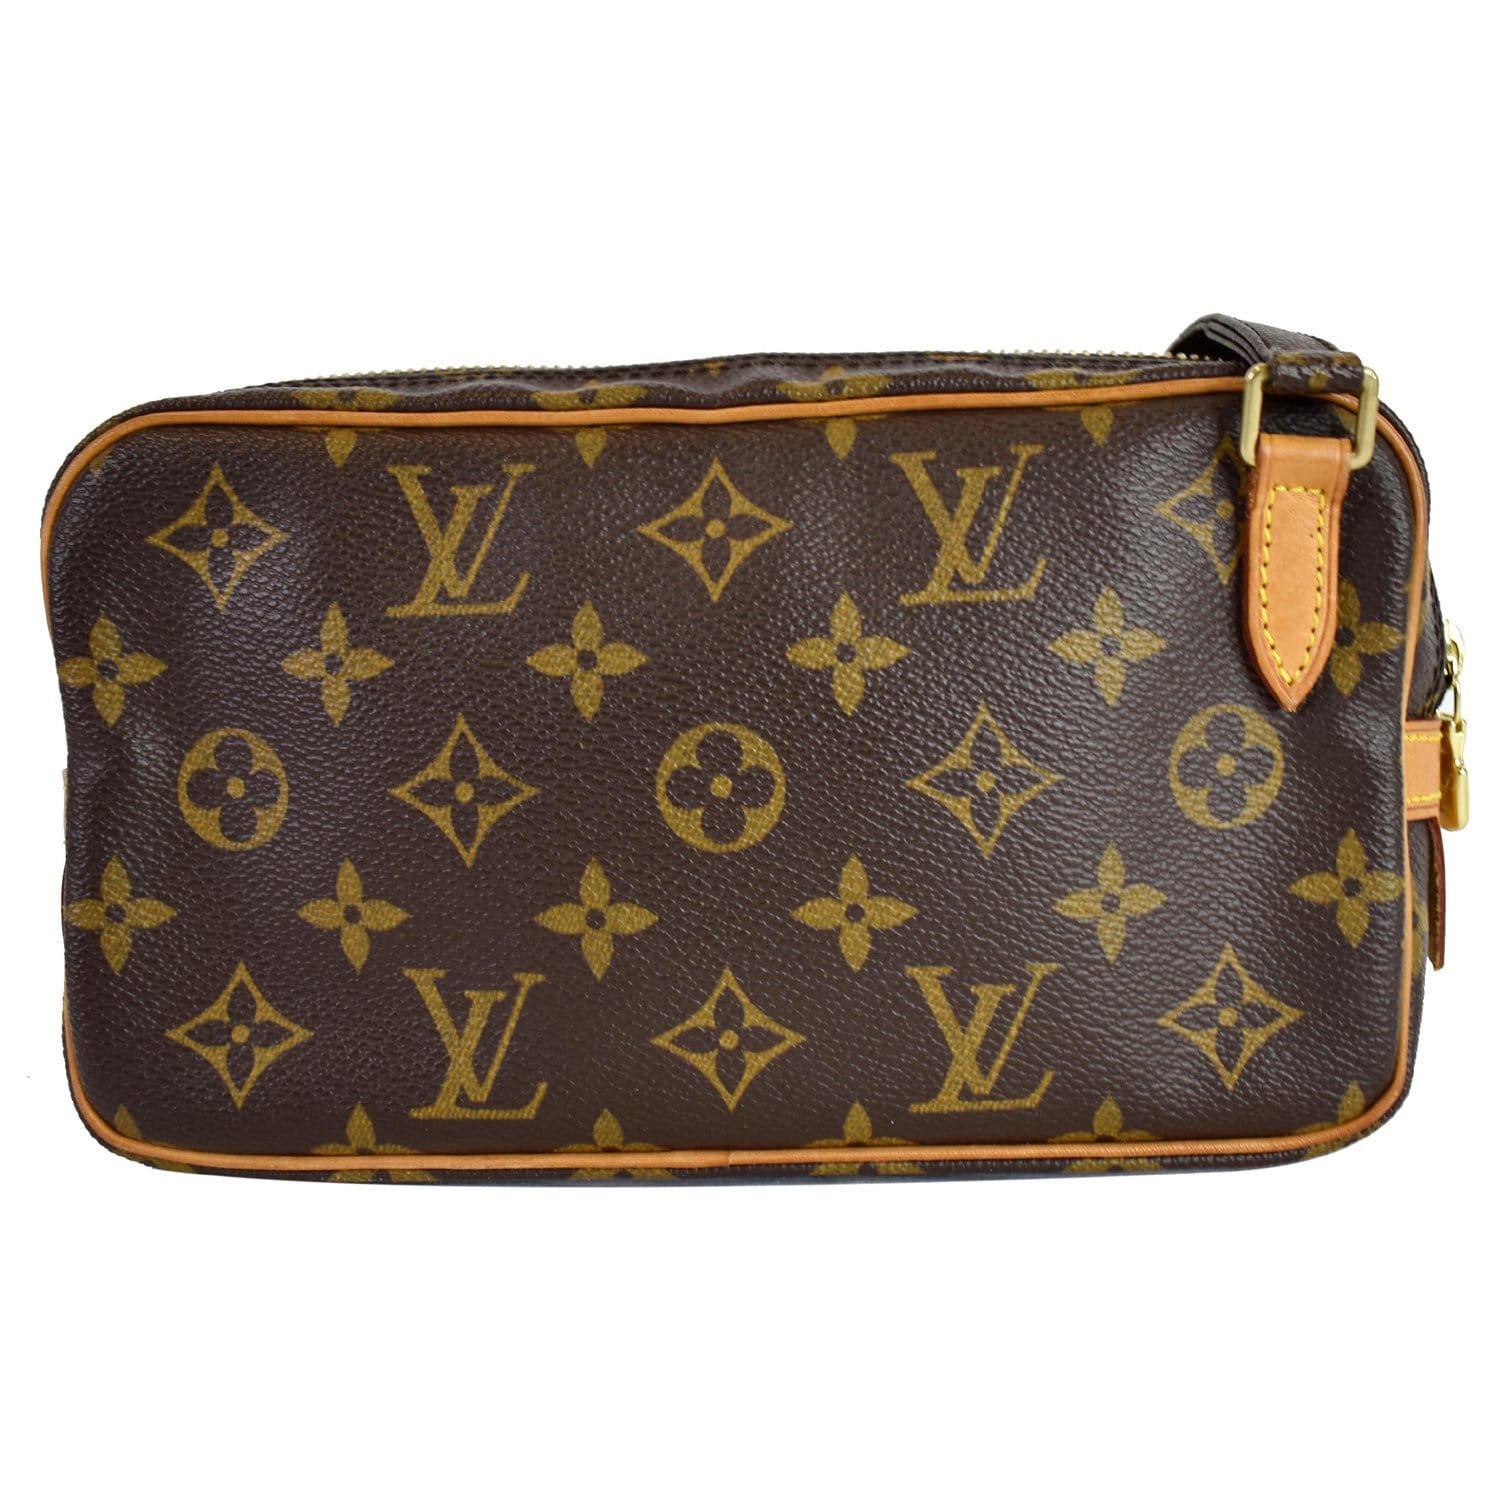 Louis Vuitton Marly handbag clutch in monogram canvas and natural